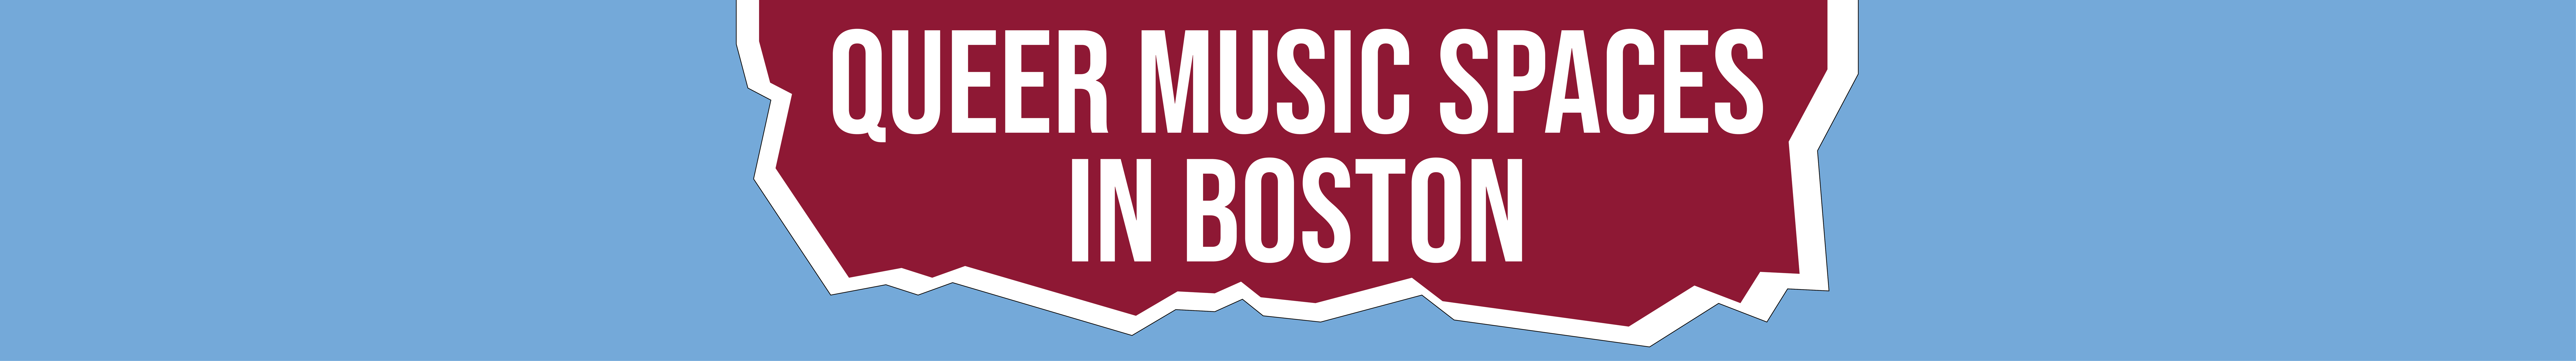 Queer, LGBTQ-friendly Music Spaces in Boston